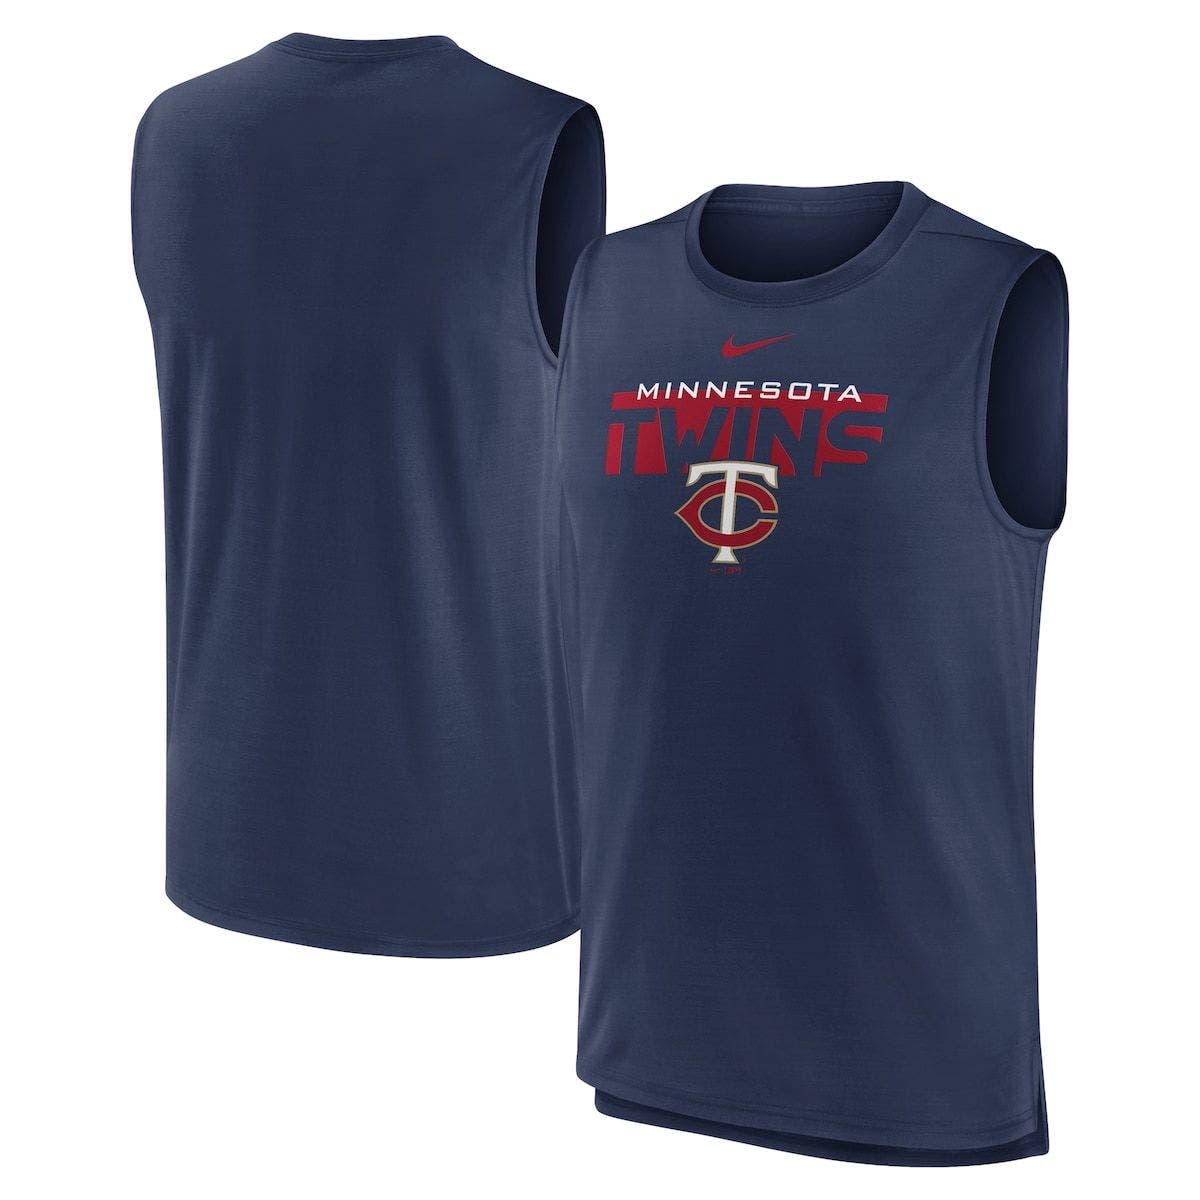 Houston Texans Themed Casual Athletic Running Shoe Mens Womens Sizes Football Apparel Gear and Gifts for Men Women Fan Texan Merchandise